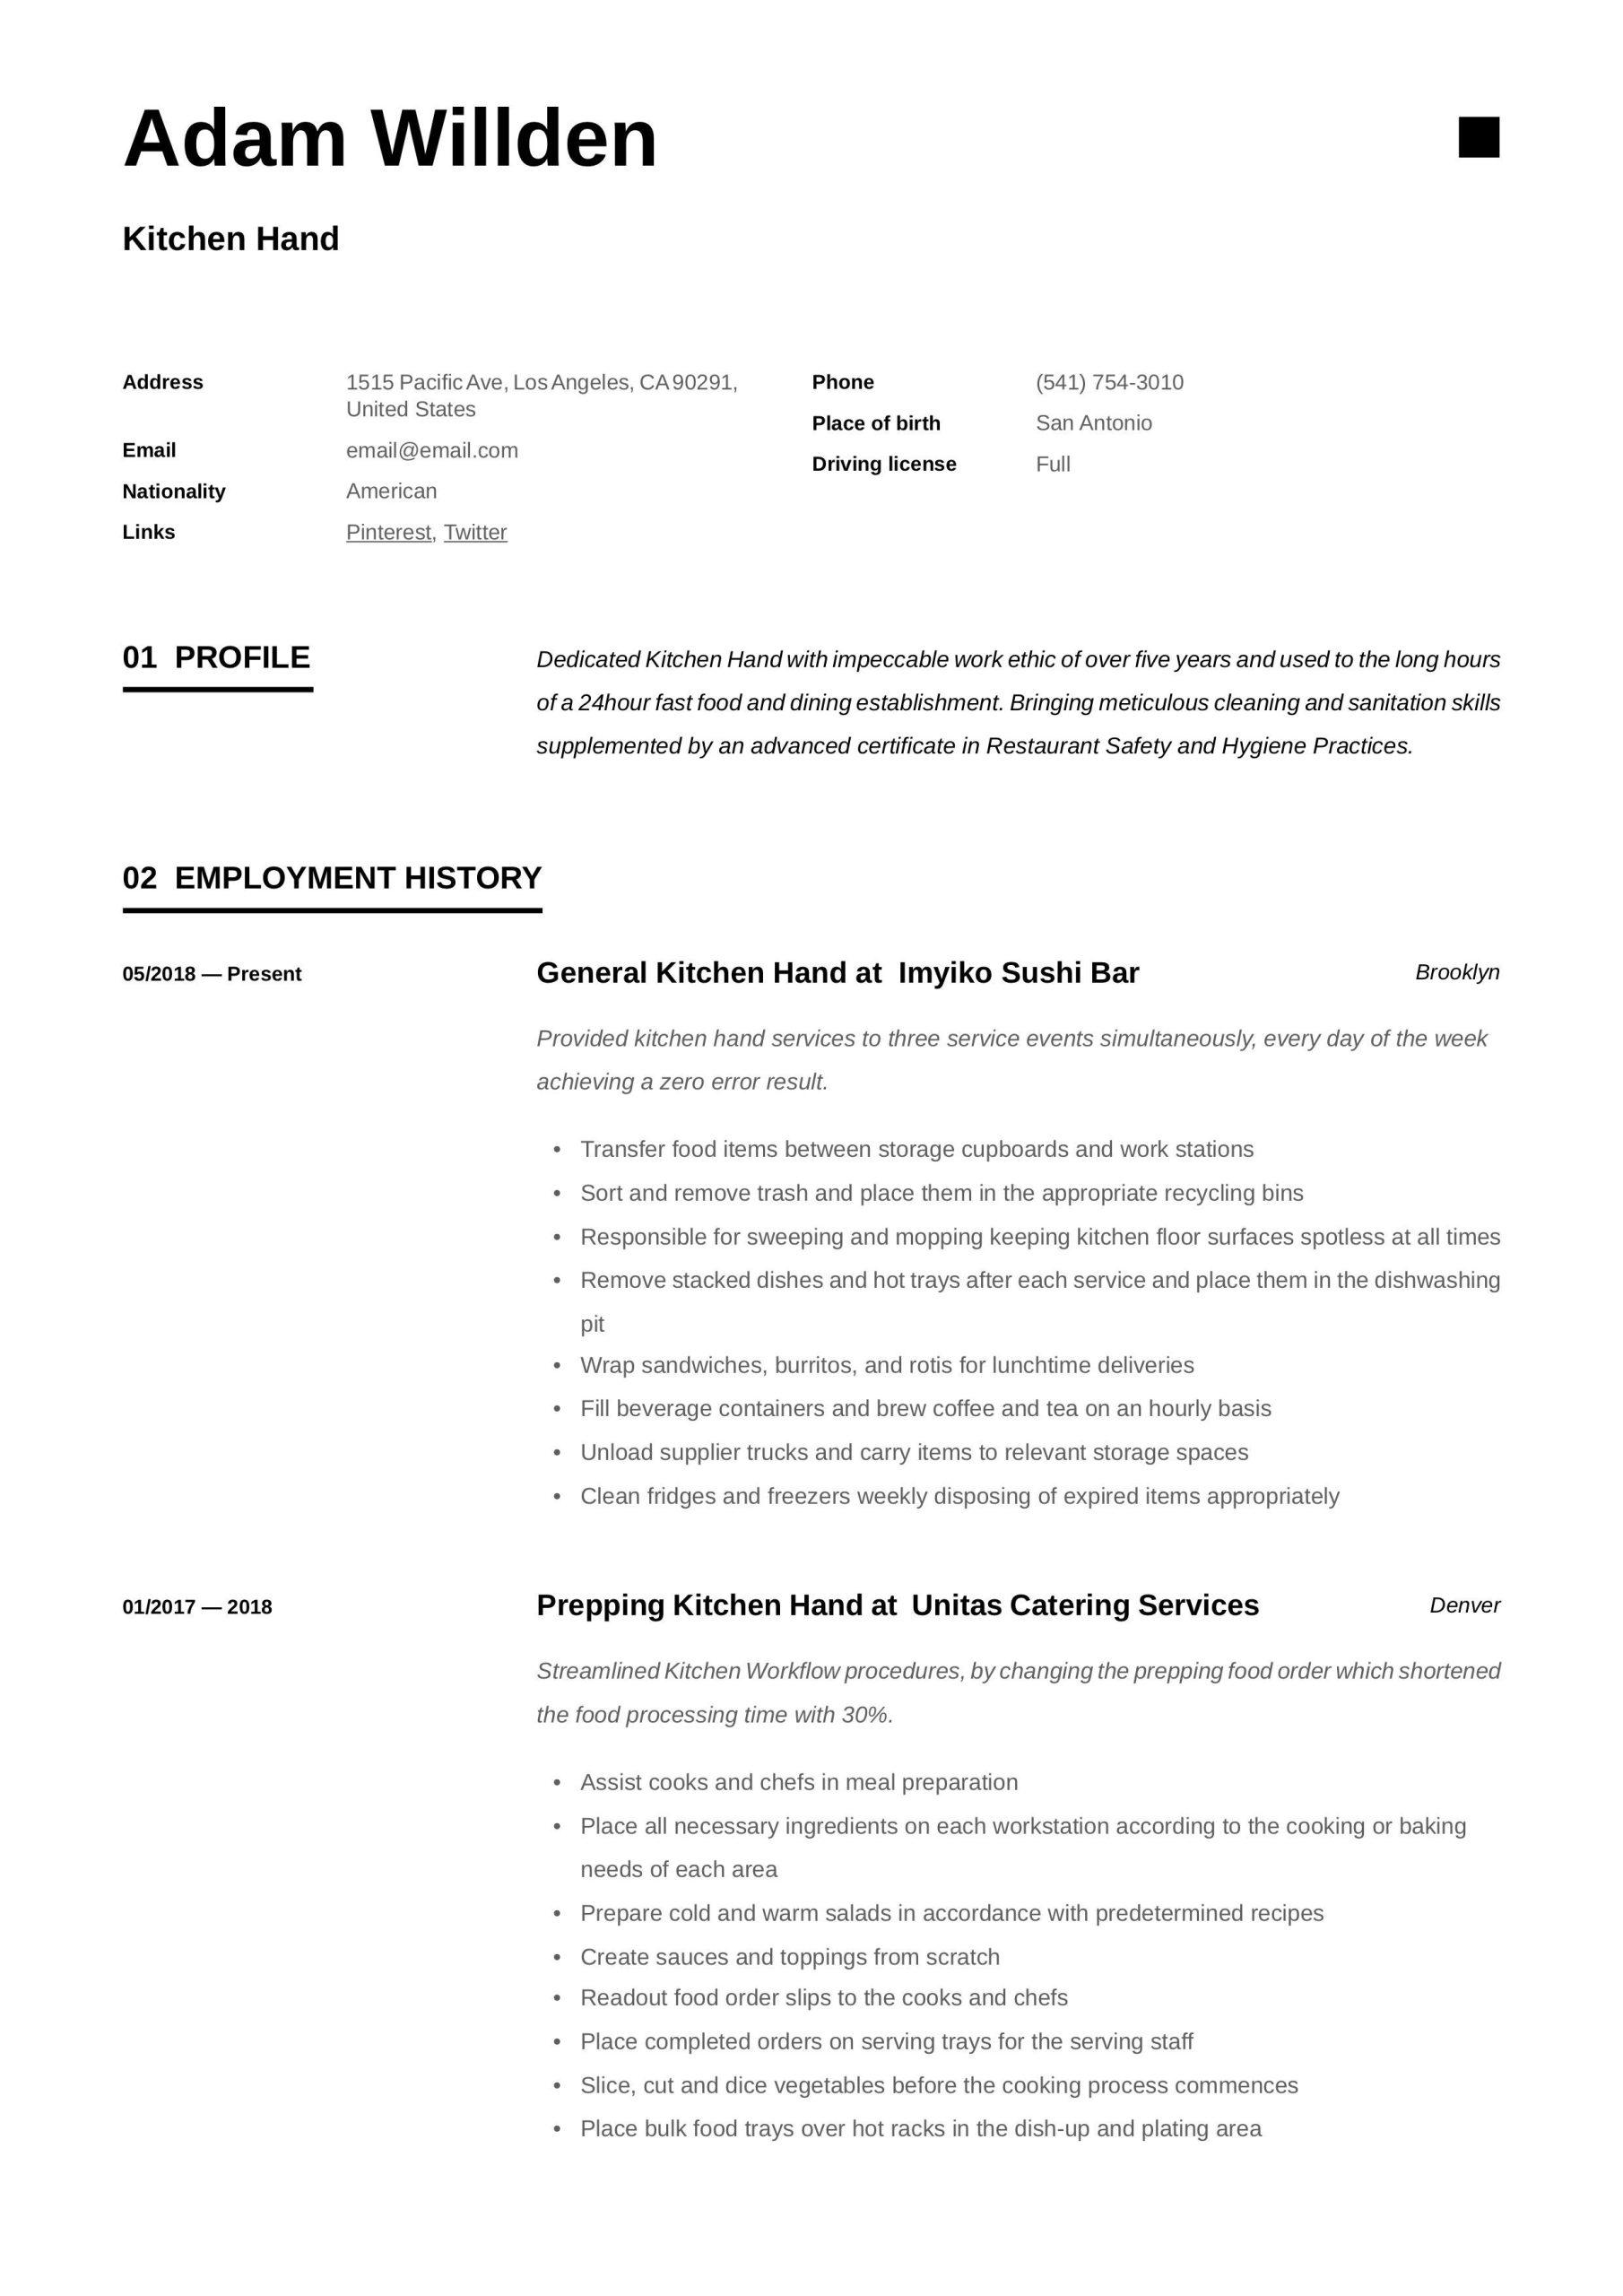 Sample Resume for Restaurant Kitchen Hand Kitchen Hand Resume Template Guided Writing, Resume, Resume Template